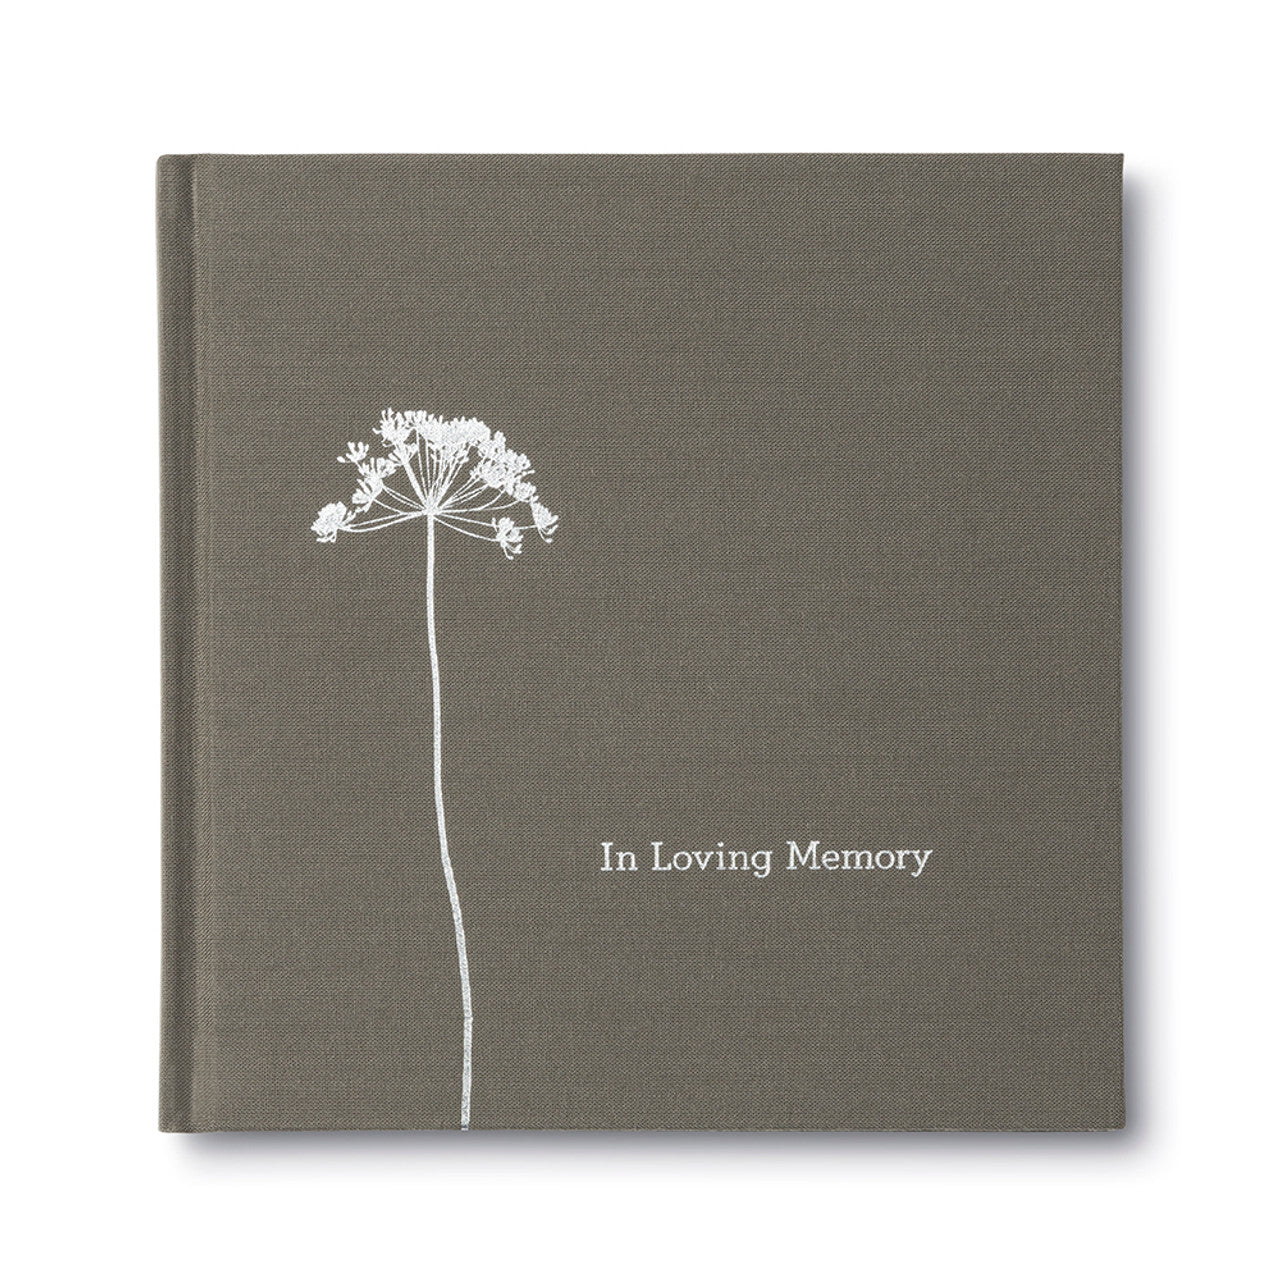 Closeup of the book, In Loving Memory, included in the sympathy gift basket.